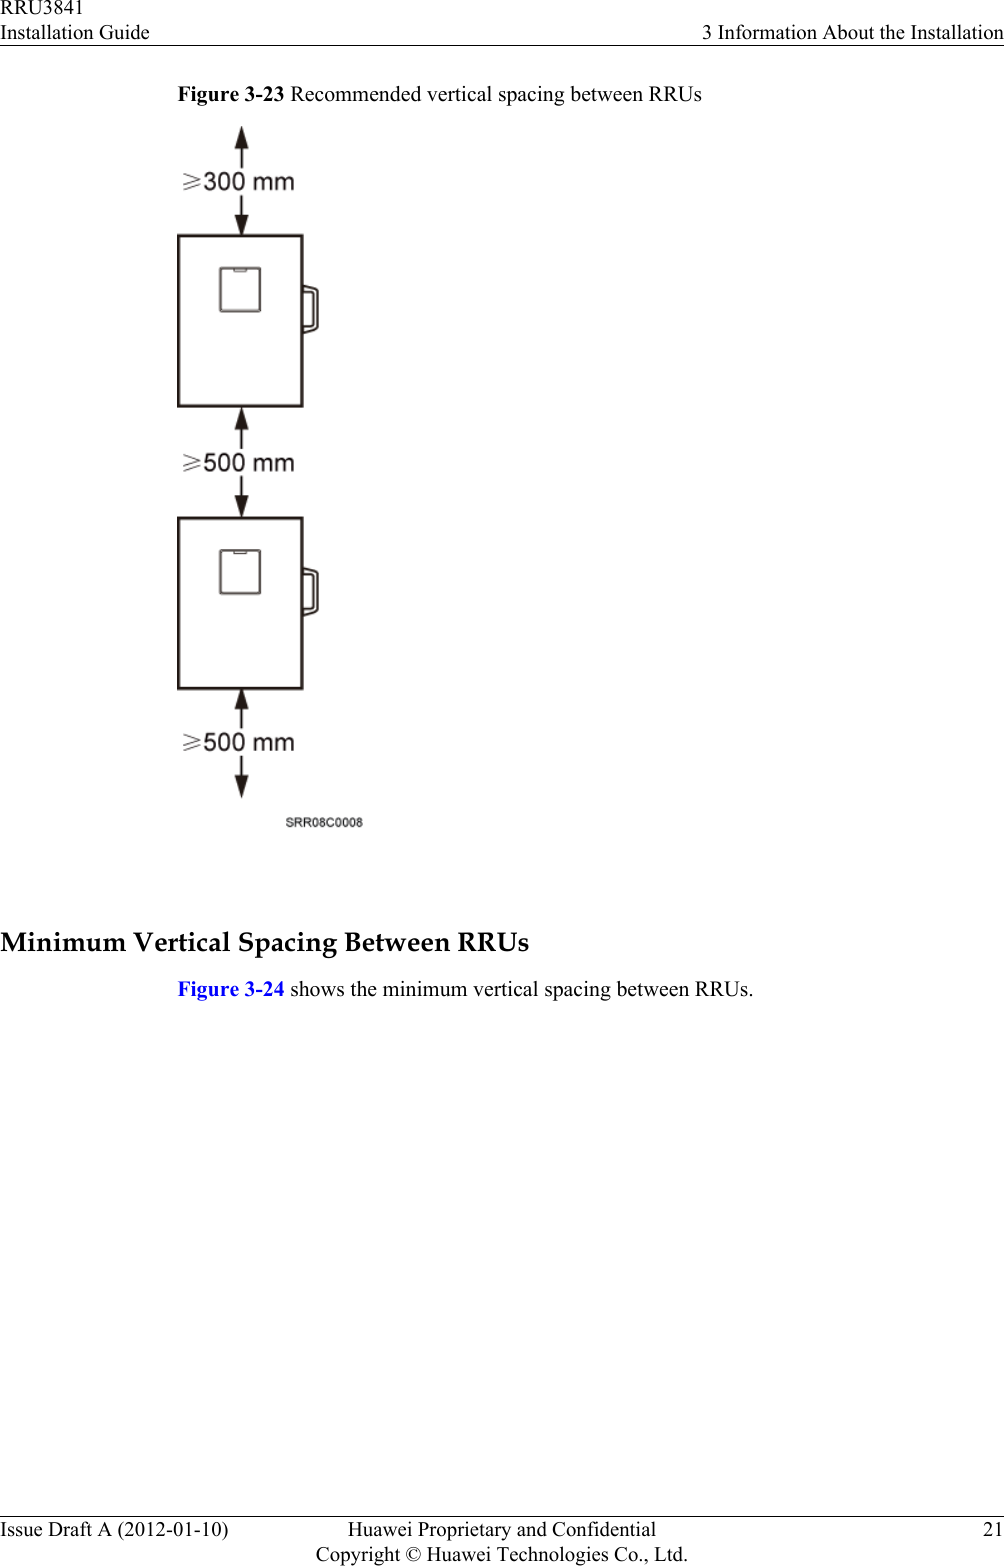 Figure 3-23 Recommended vertical spacing between RRUs Minimum Vertical Spacing Between RRUsFigure 3-24 shows the minimum vertical spacing between RRUs.RRU3841Installation Guide 3 Information About the InstallationIssue Draft A (2012-01-10) Huawei Proprietary and ConfidentialCopyright © Huawei Technologies Co., Ltd.21